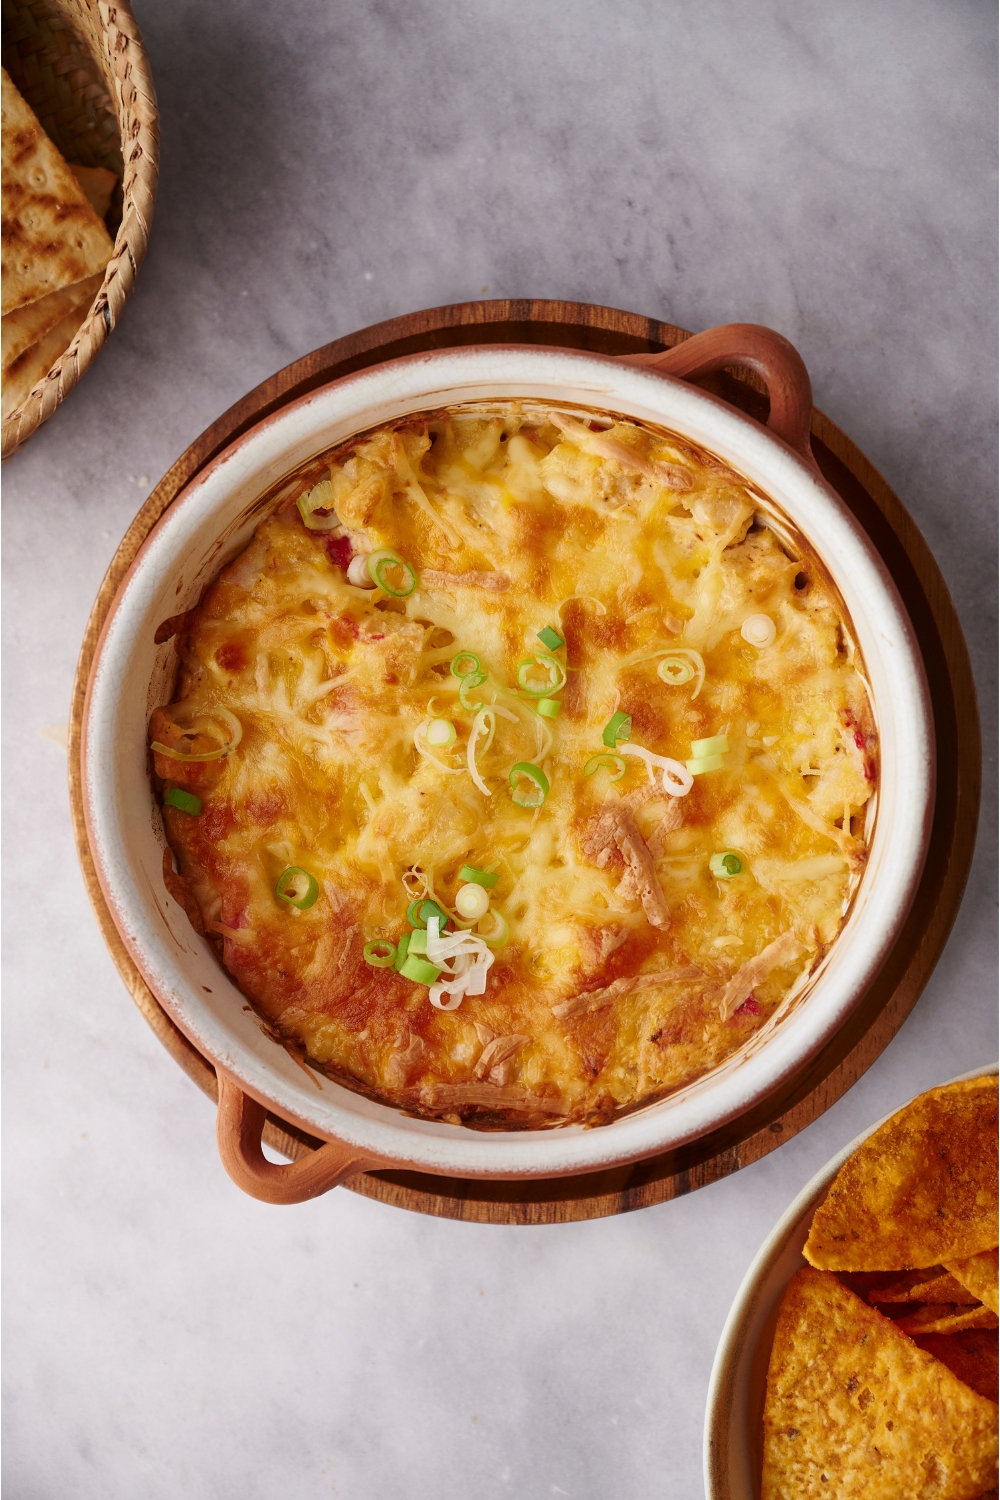 Crab dip in a white and brown baking dish garnished with diced green onion.